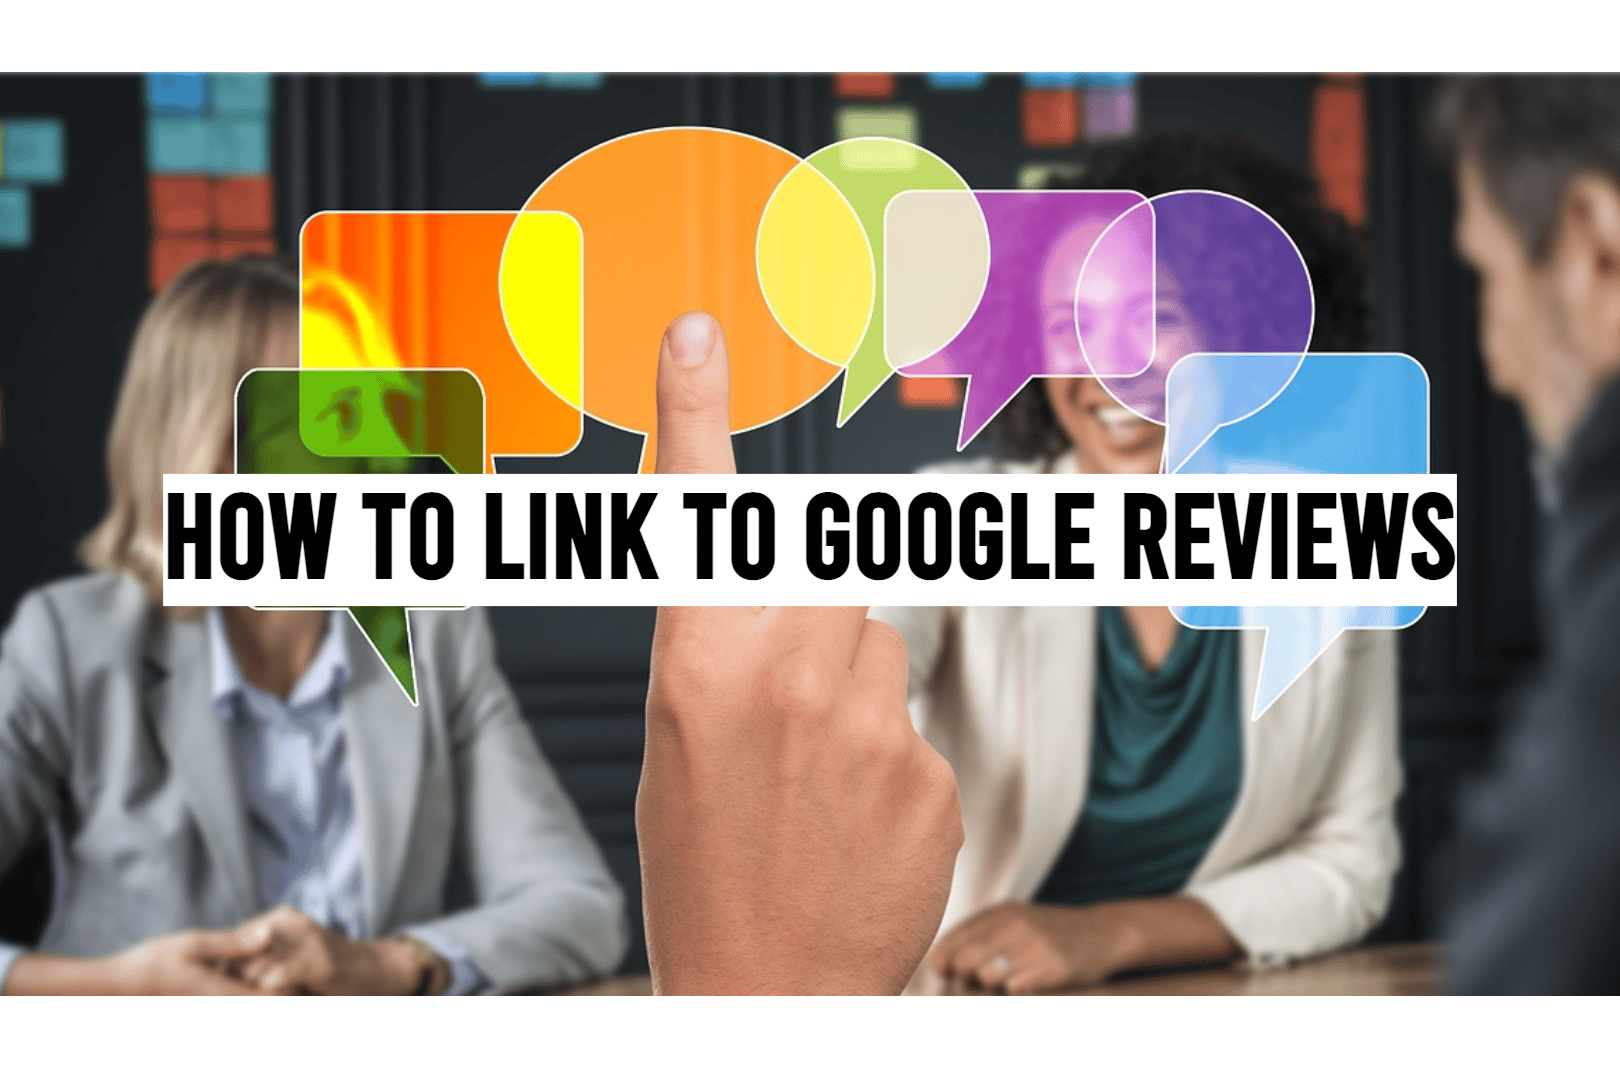 How to Link to Google Reviews